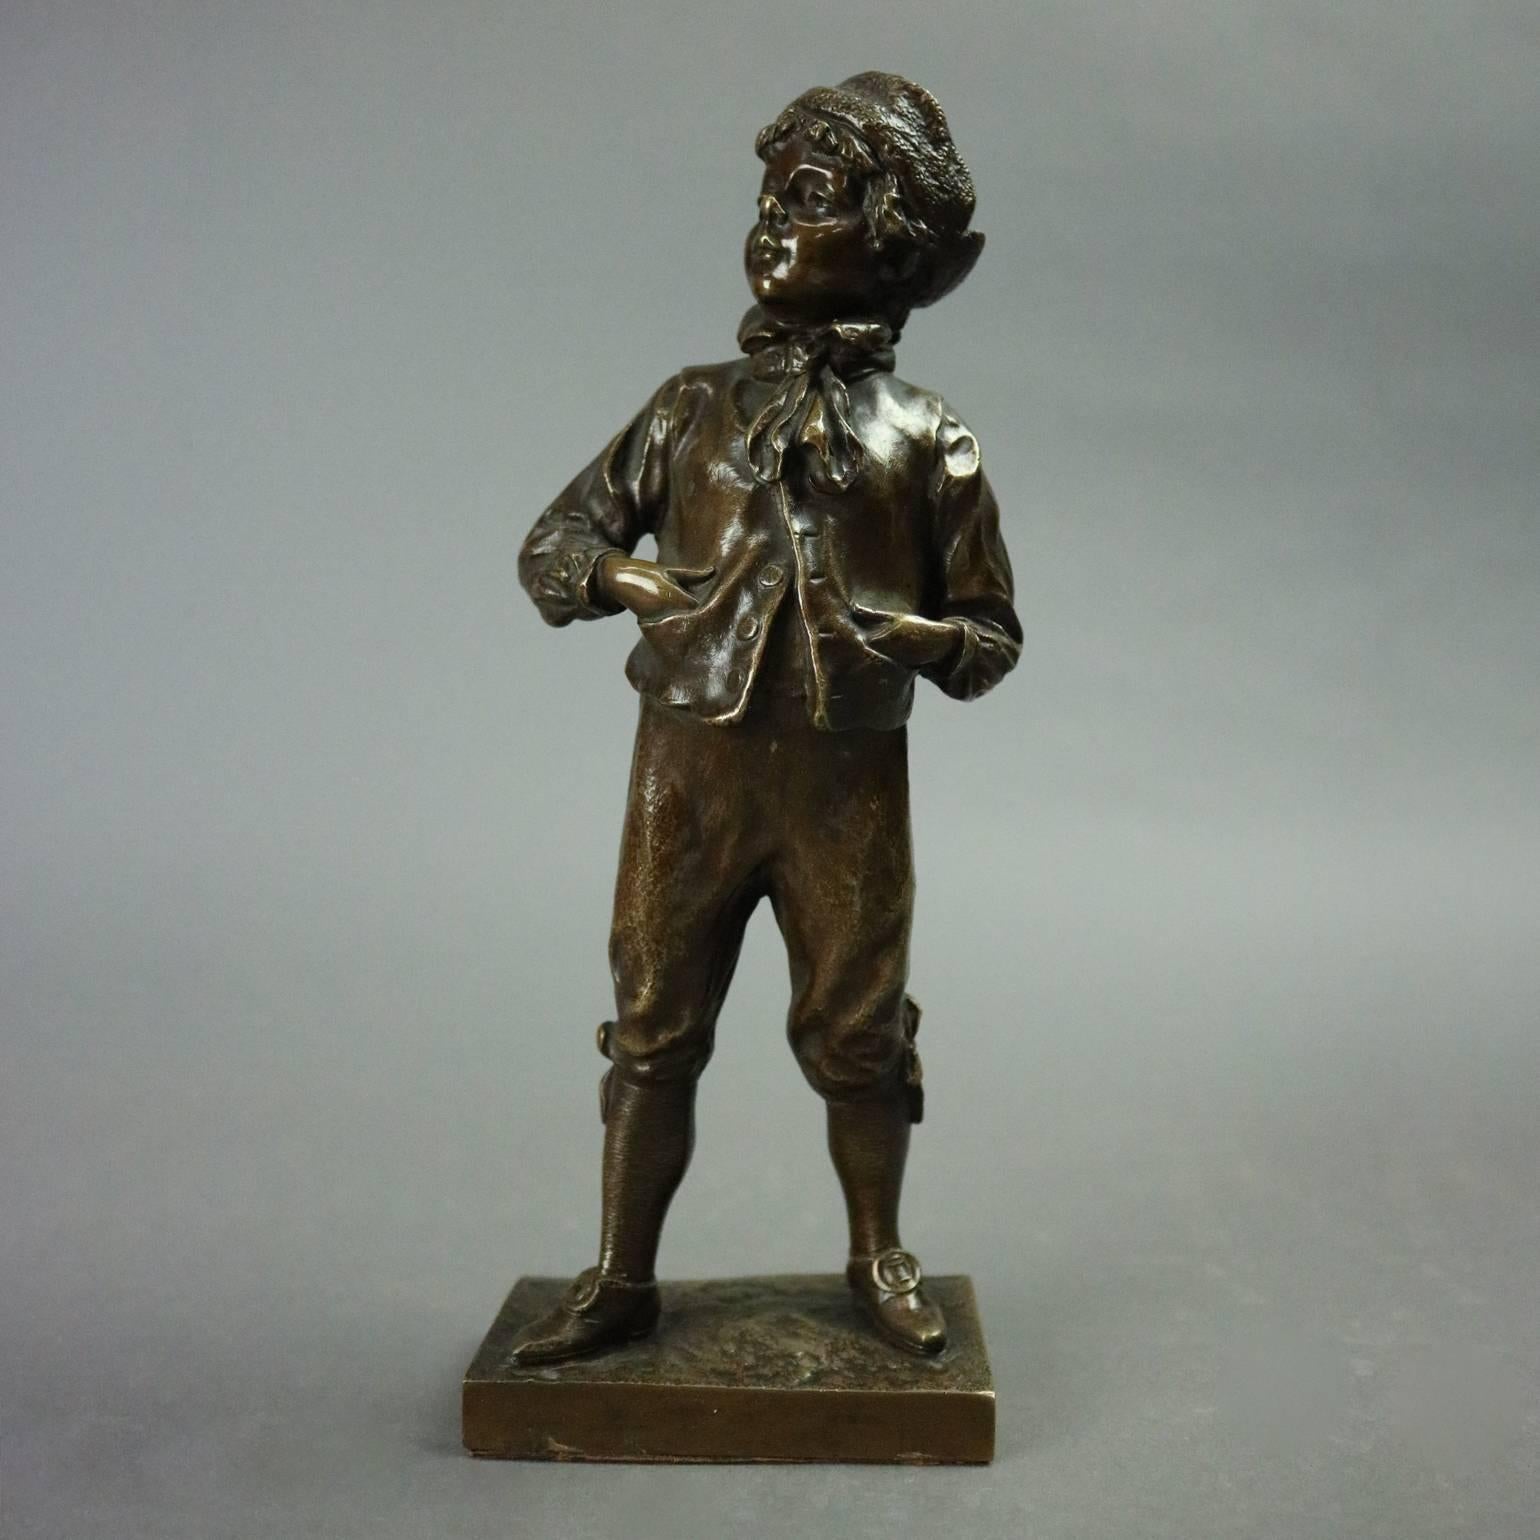 Antique French bronzed metal sculpture of boy with his hands in his pockets signed on base M. Lindenberg (German, 1873-1910), circa 1897

Measures: 8.5" H x 3.25" W x 1.75" D.